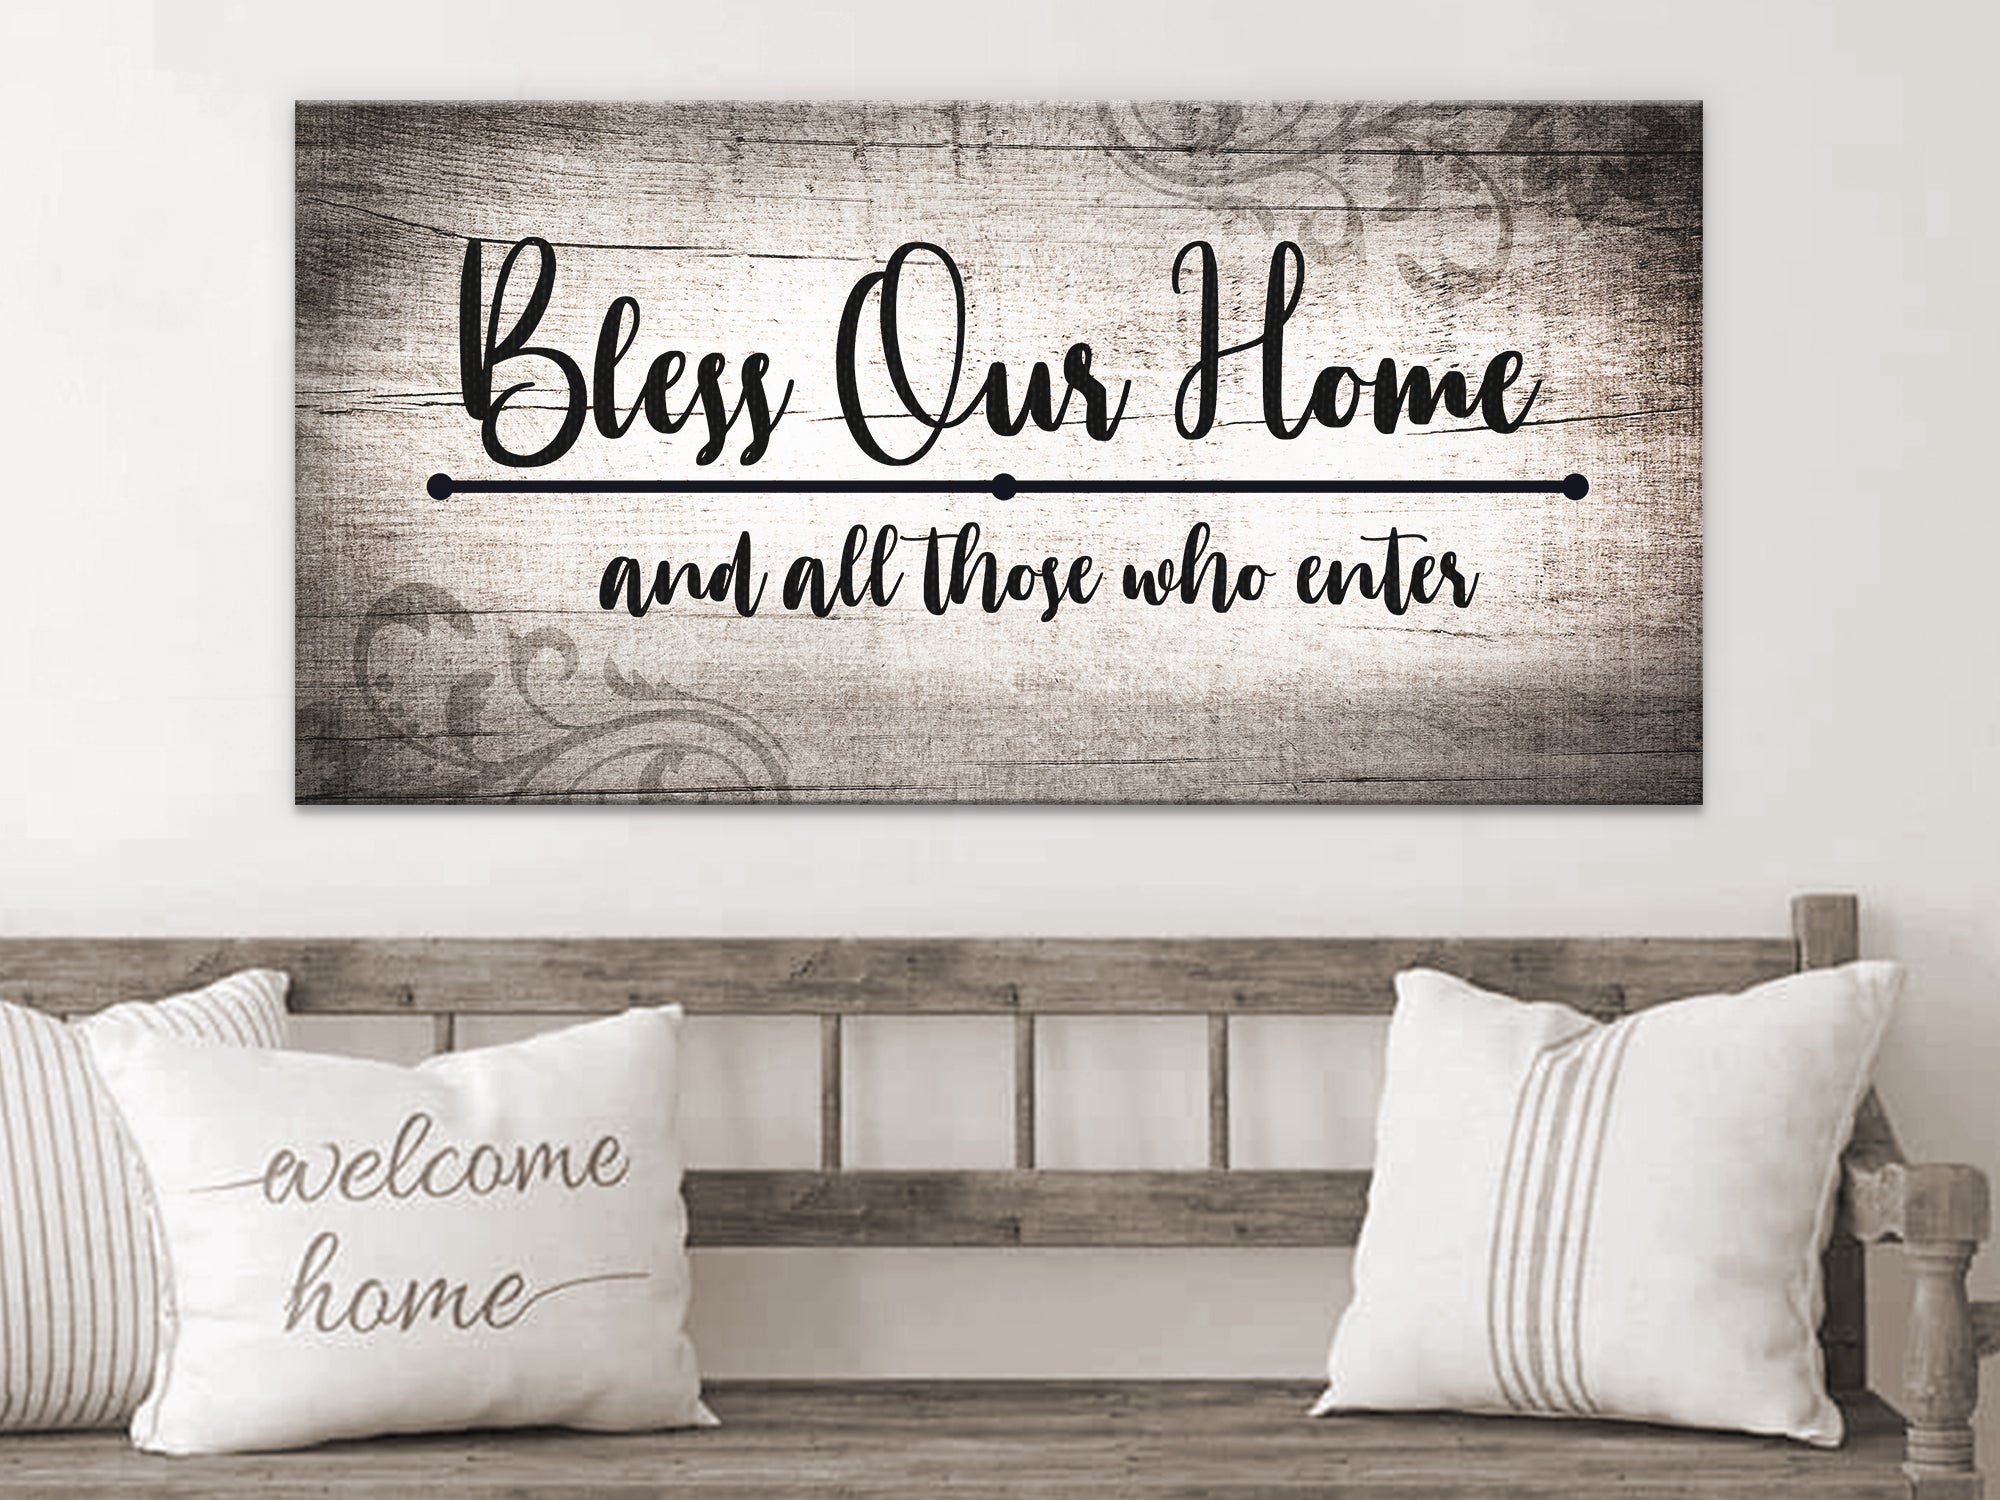 Bless Our Home Canvas Wall Art